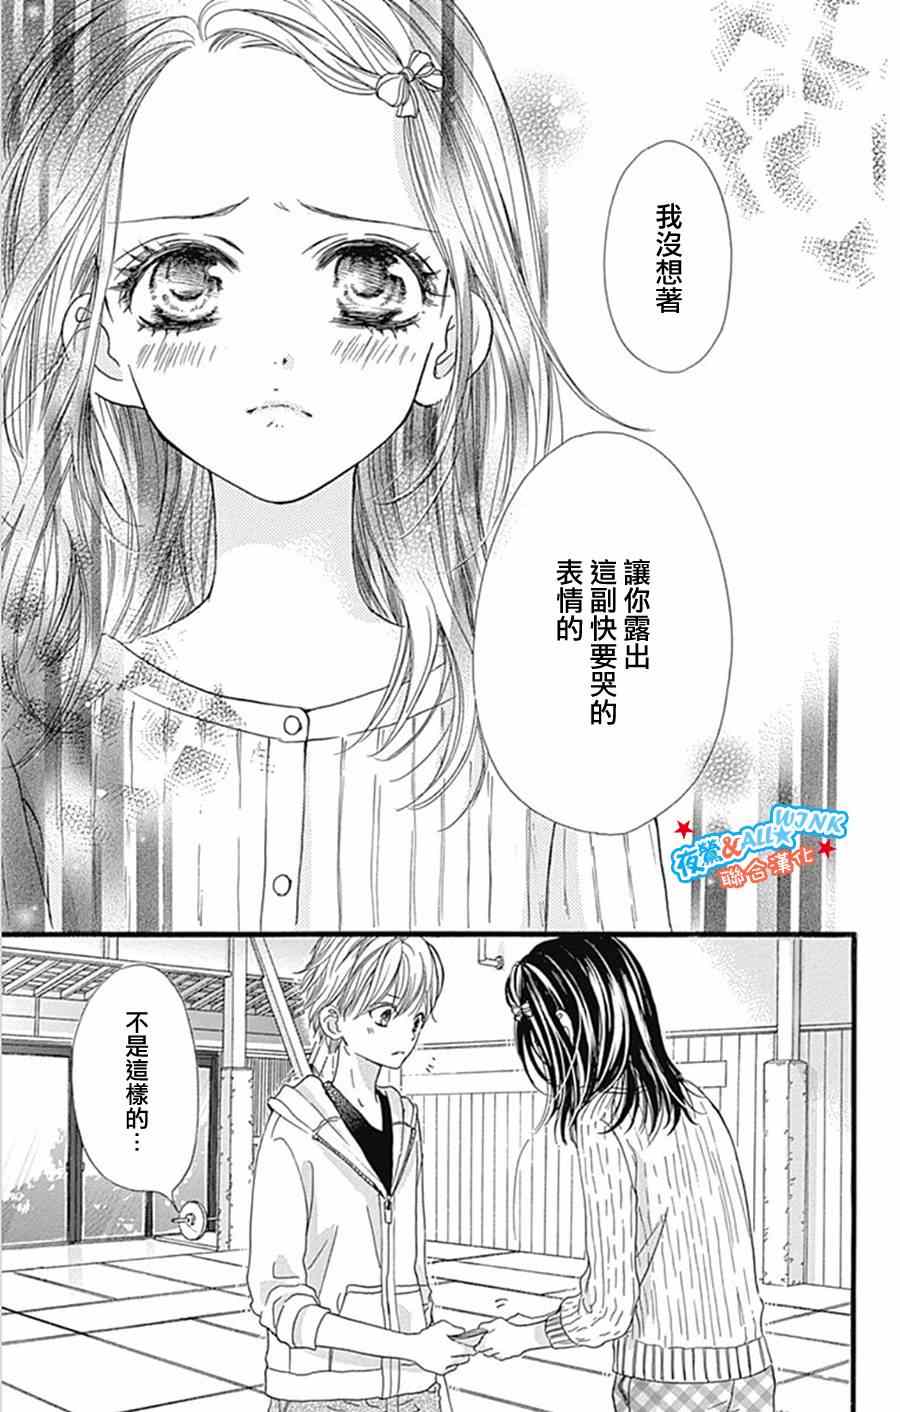 I love you baby - 第8话 - 4